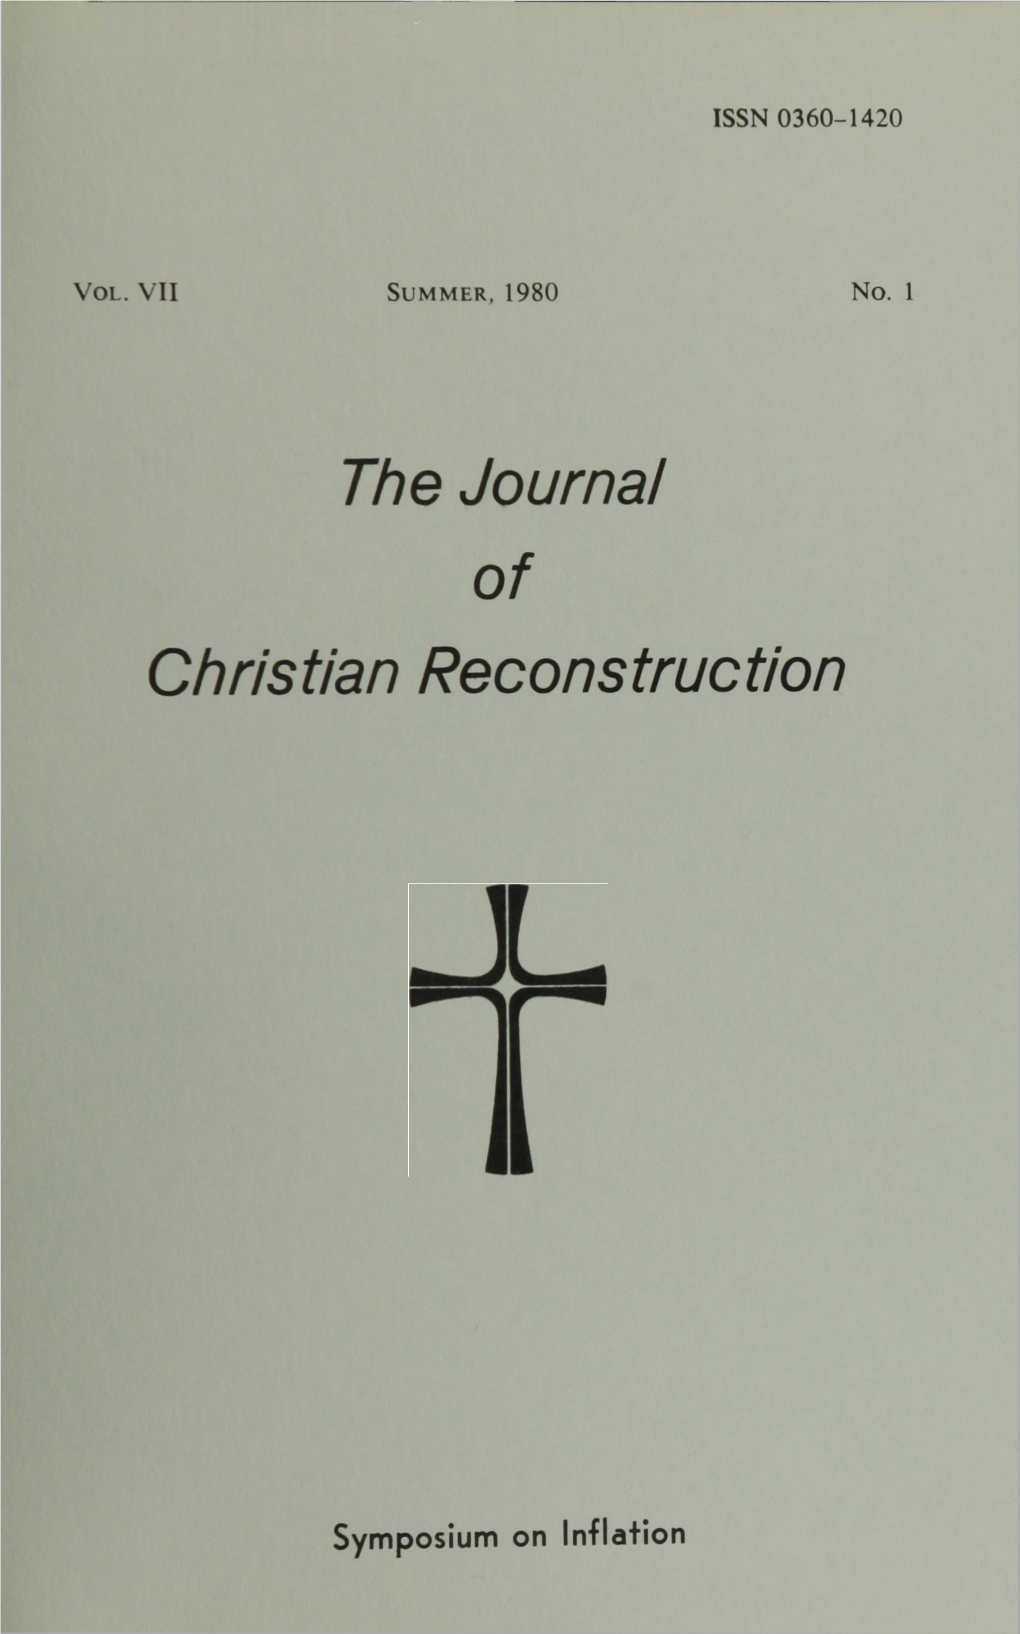 The Journal of Christian Reconstruction